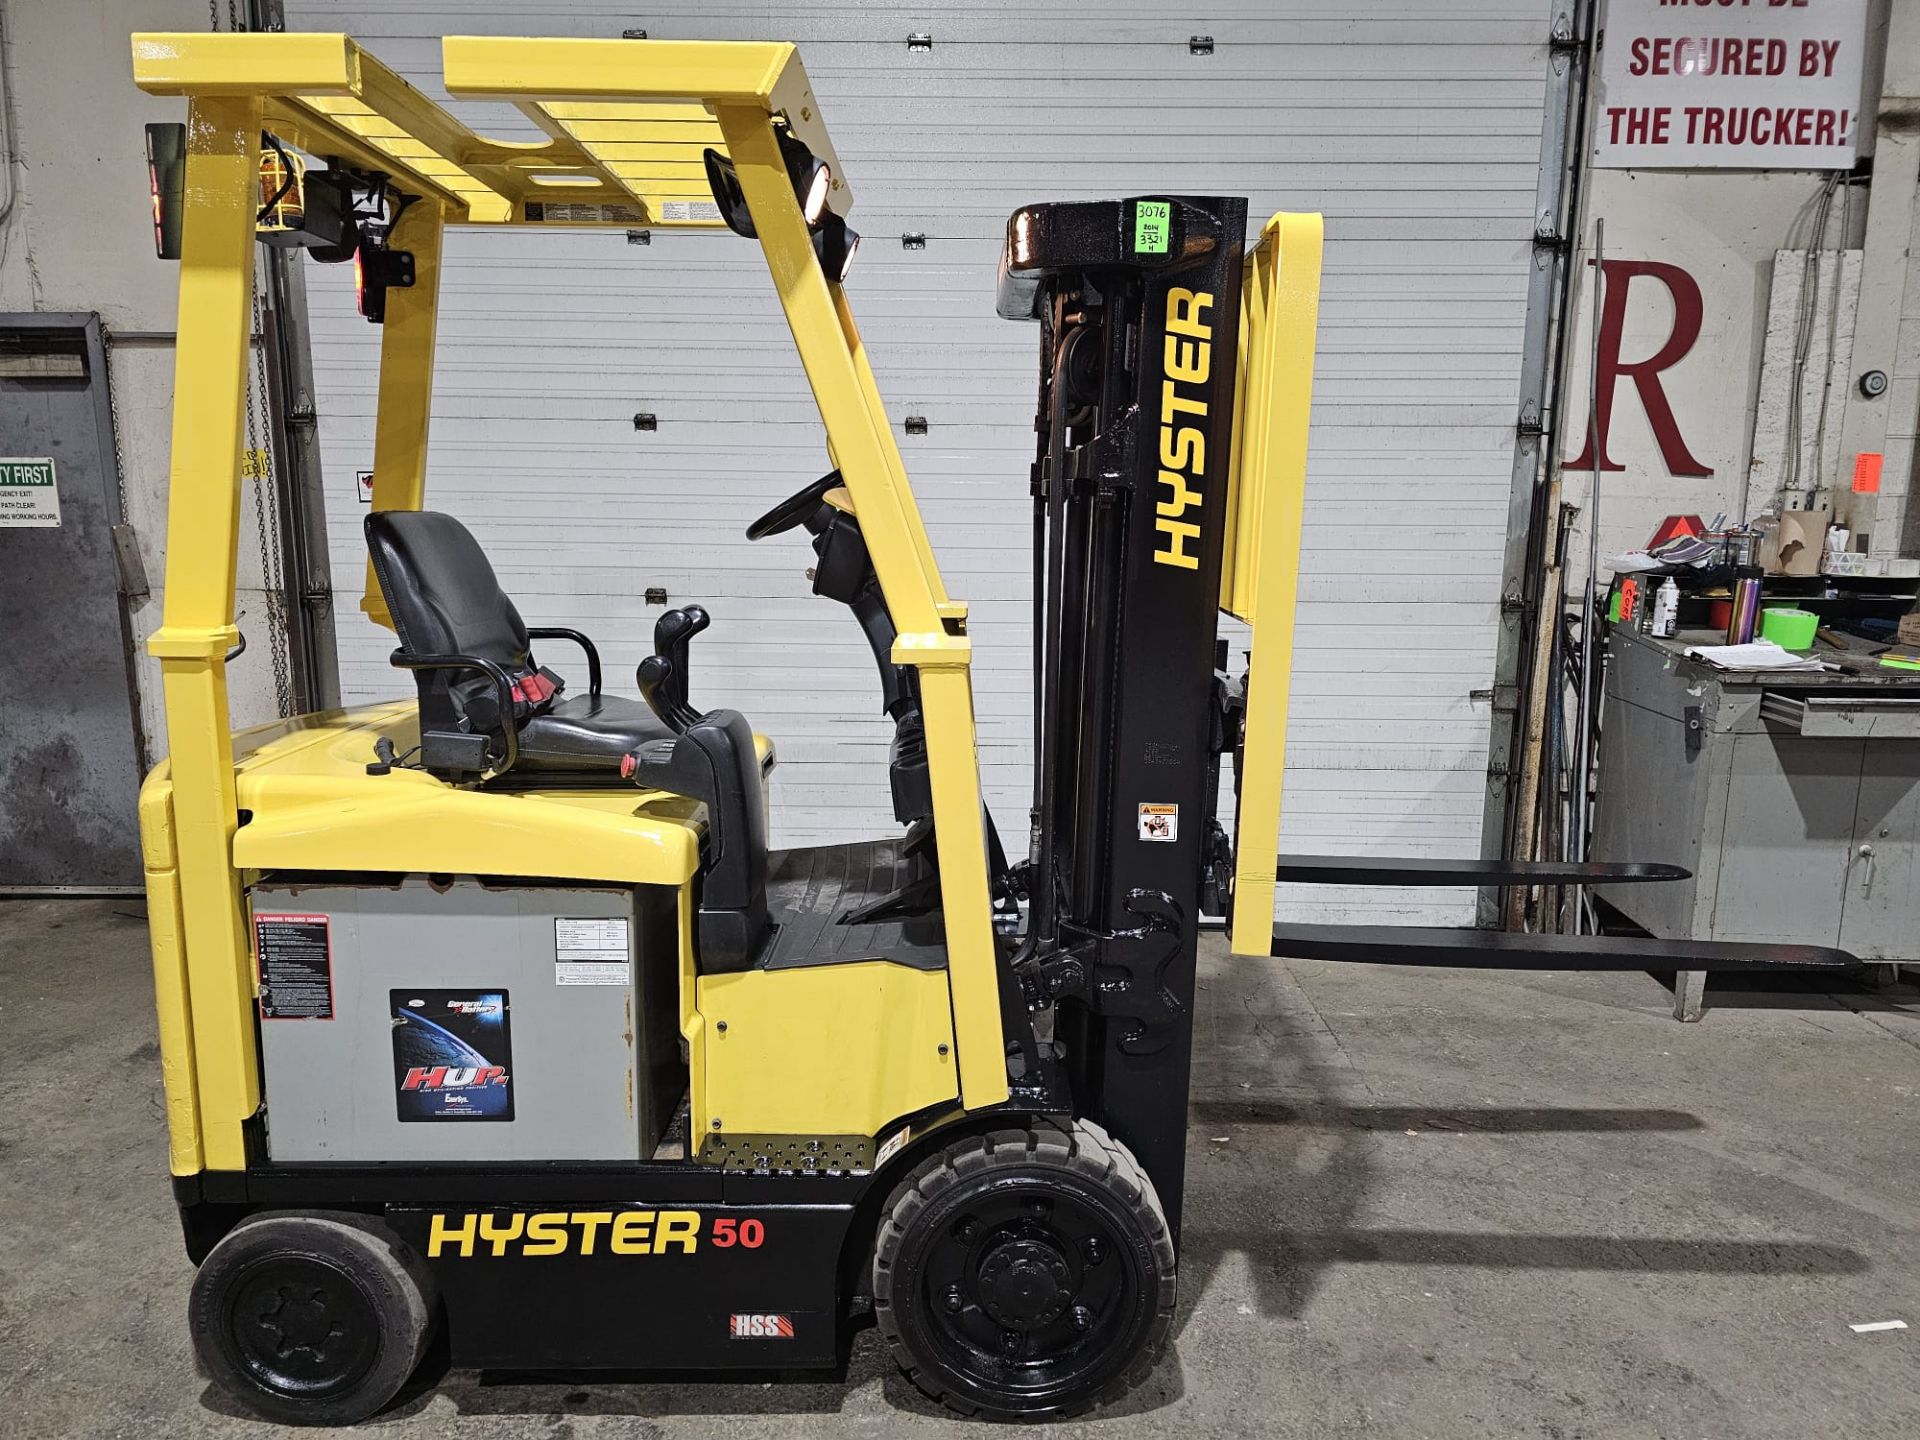 2014 Hyster 5,000lbs Capacity Electric Forklift 36V with sideshift 3-STAGE MAST 189" load height